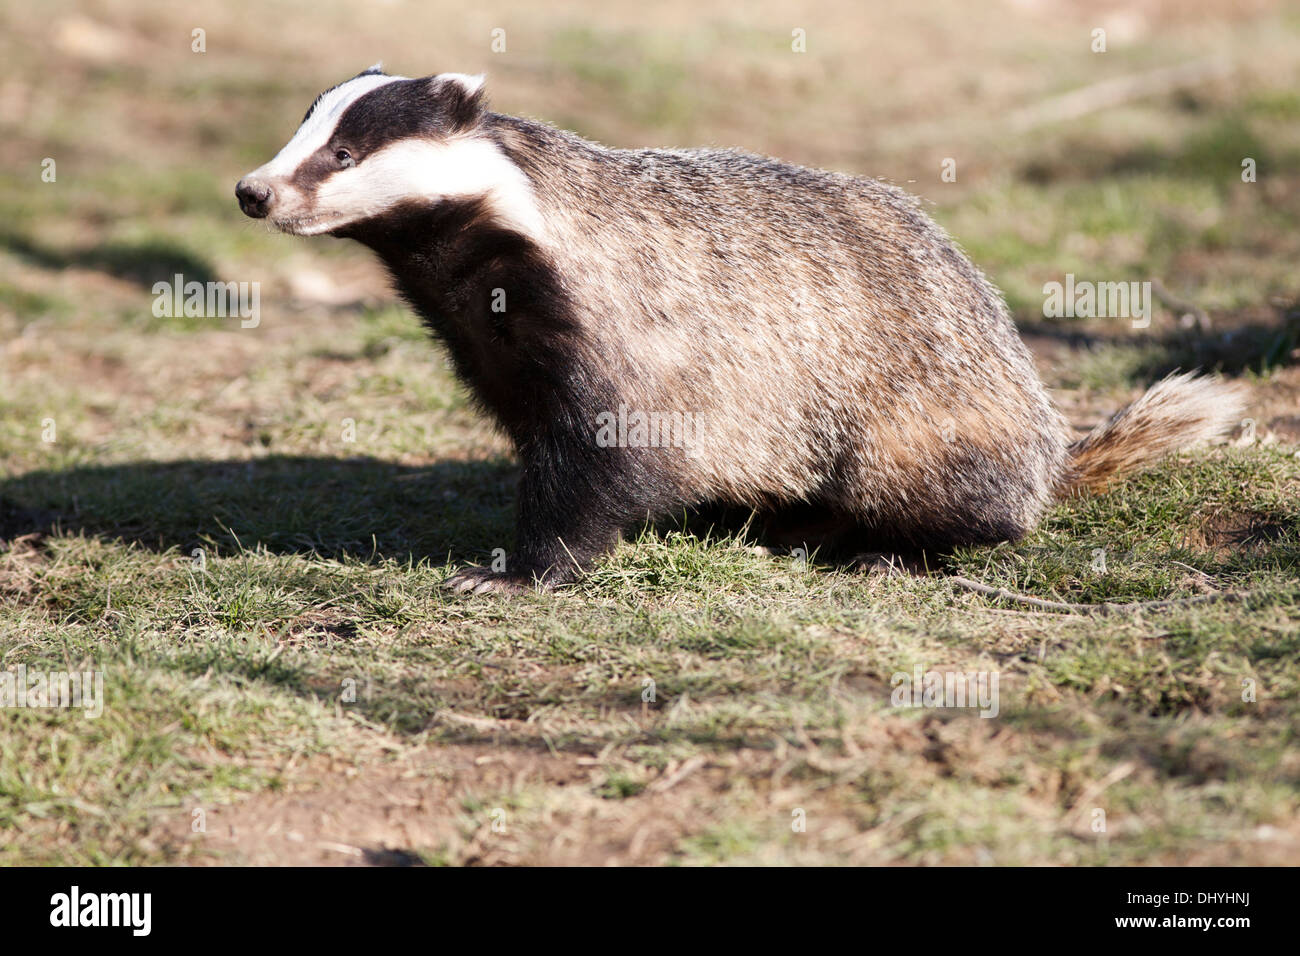 Adult Badger in the UK Stock Photo